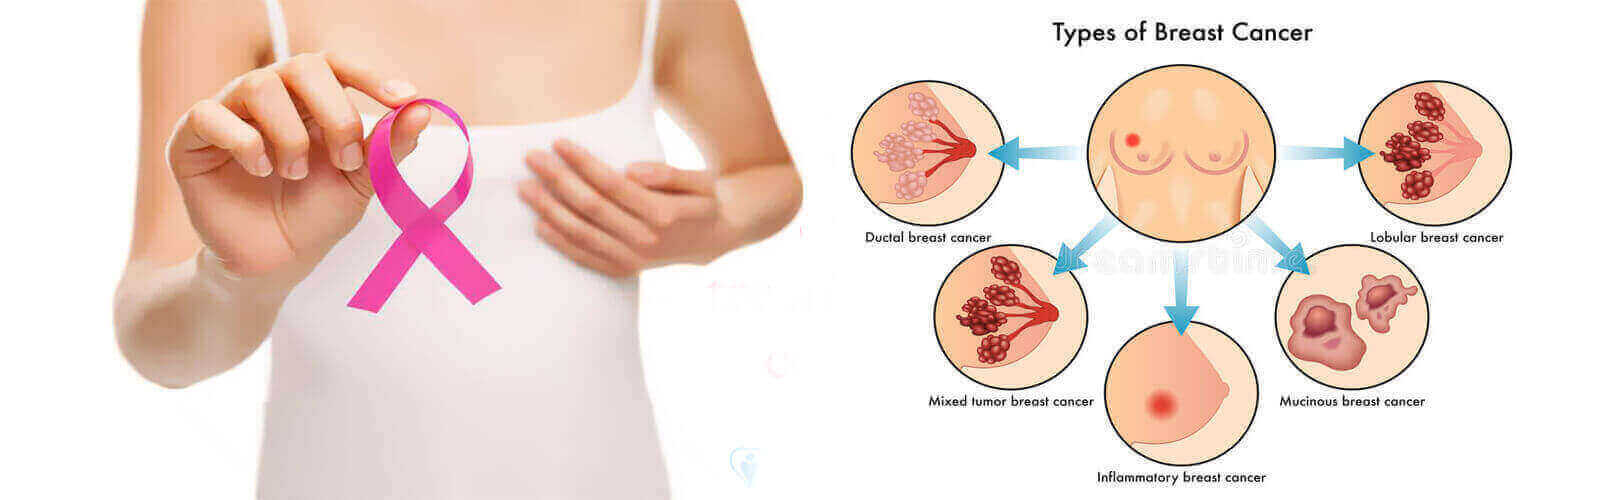 Breast Cancer Treatment in Malaysia